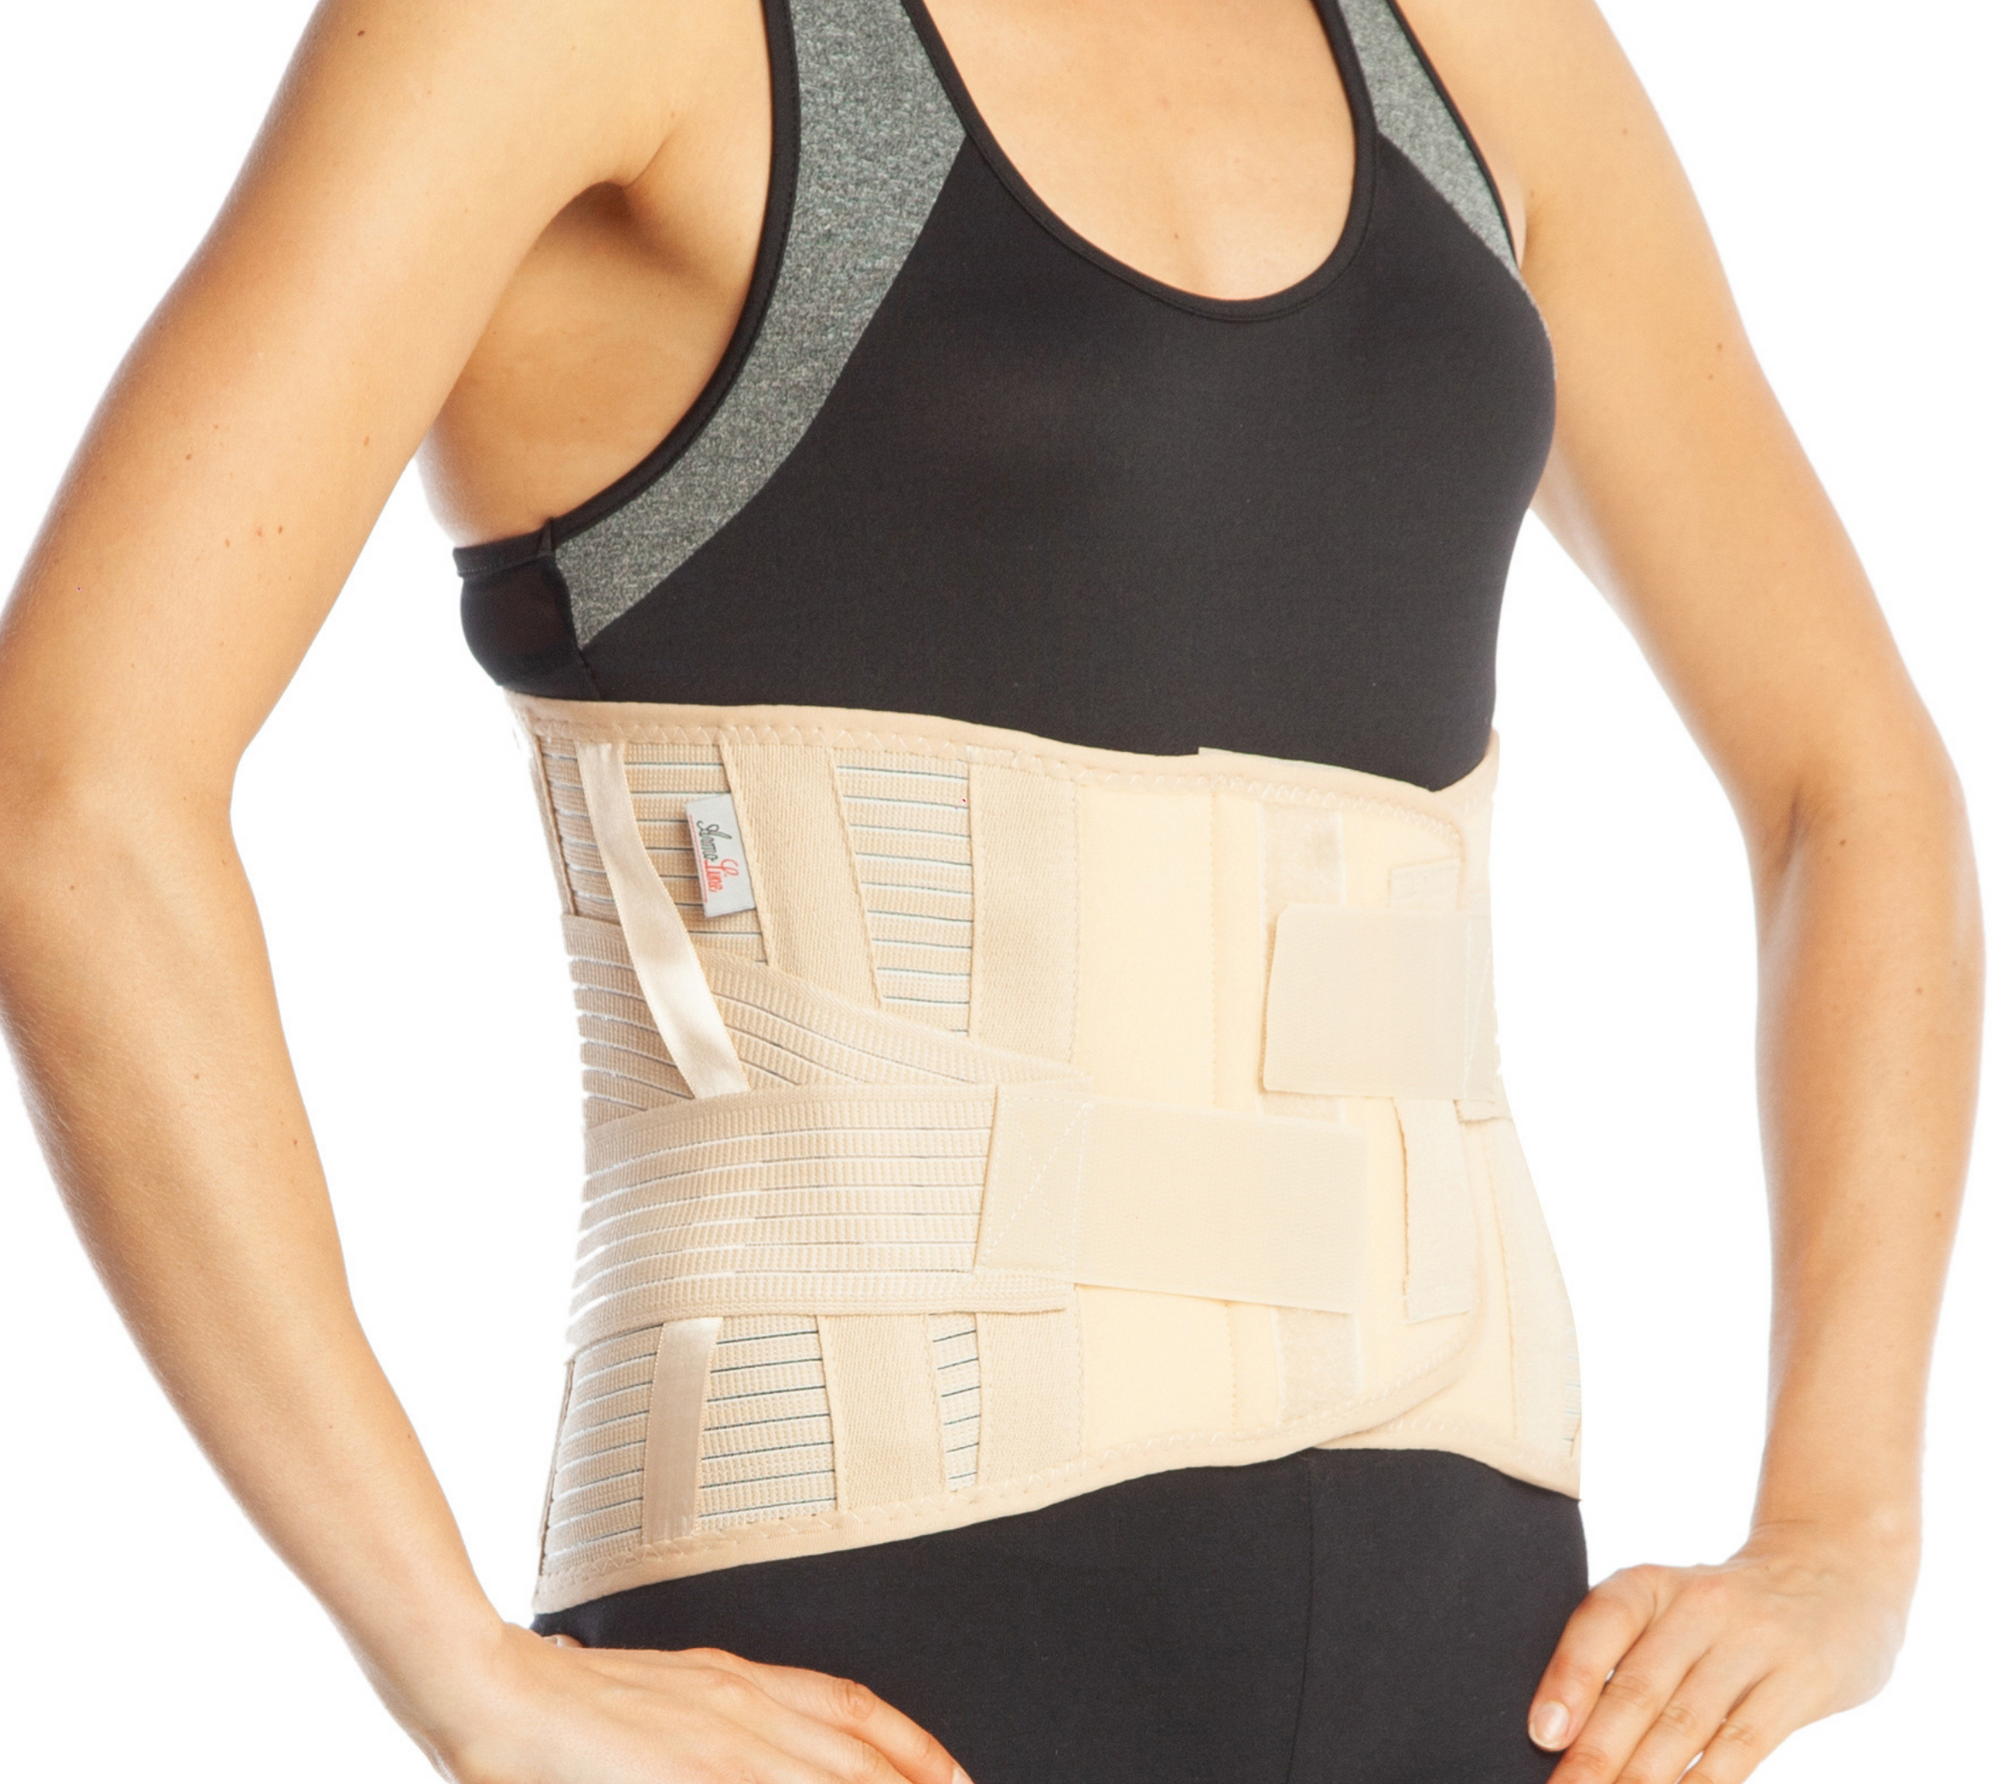 Pain Relief ArmoLine Lumbar Back Support Photograph